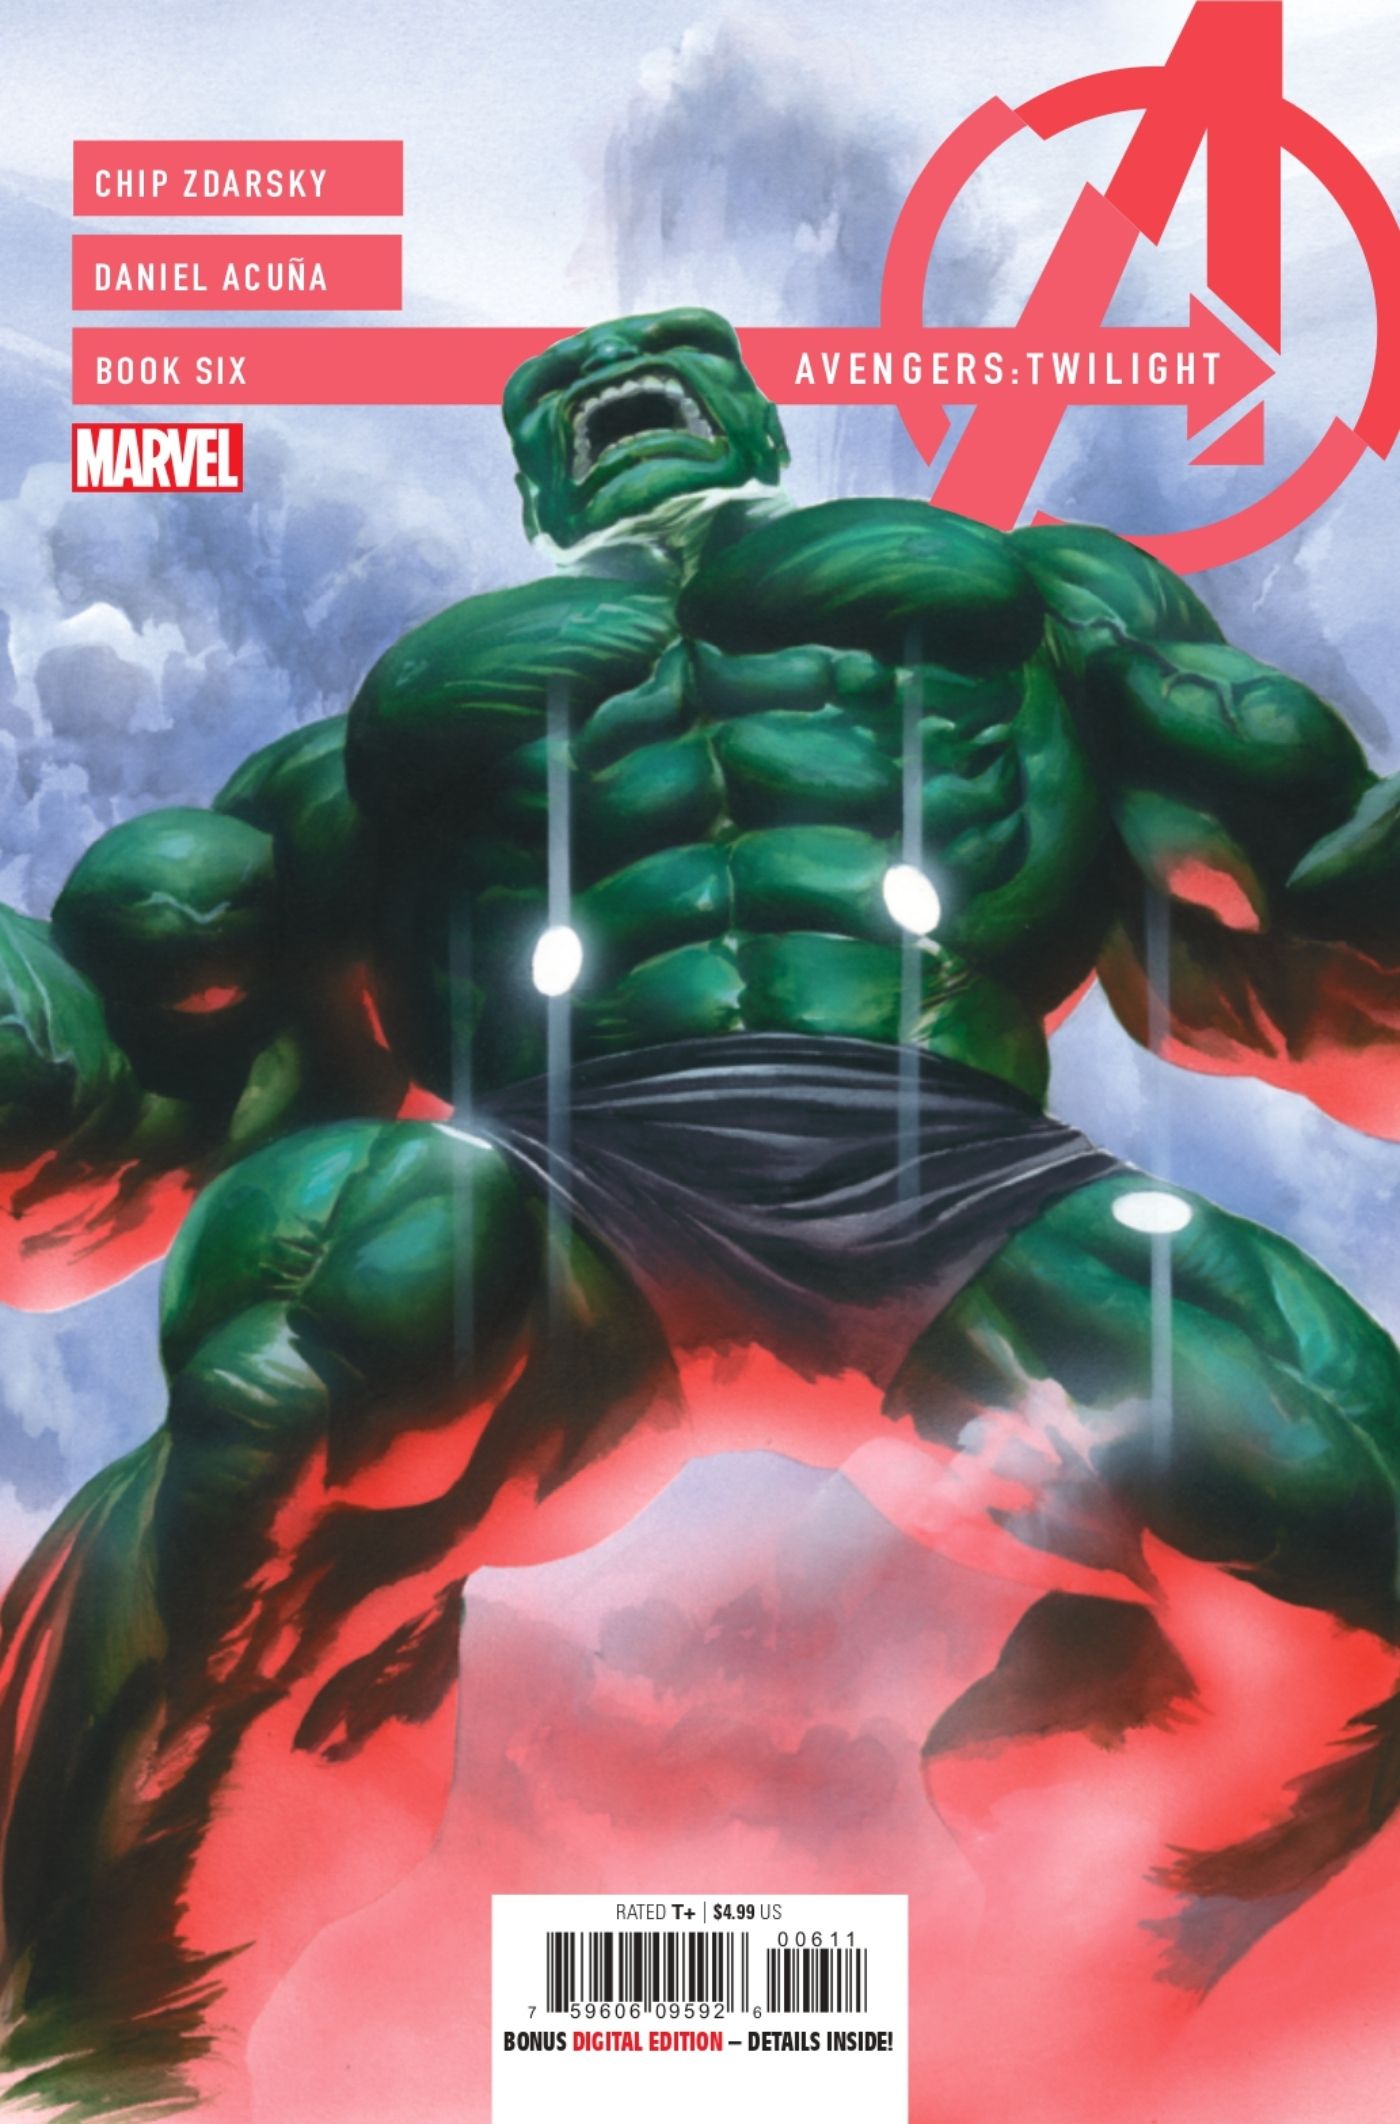 Avengers: Twilight #6 cover featuring the Hulk.